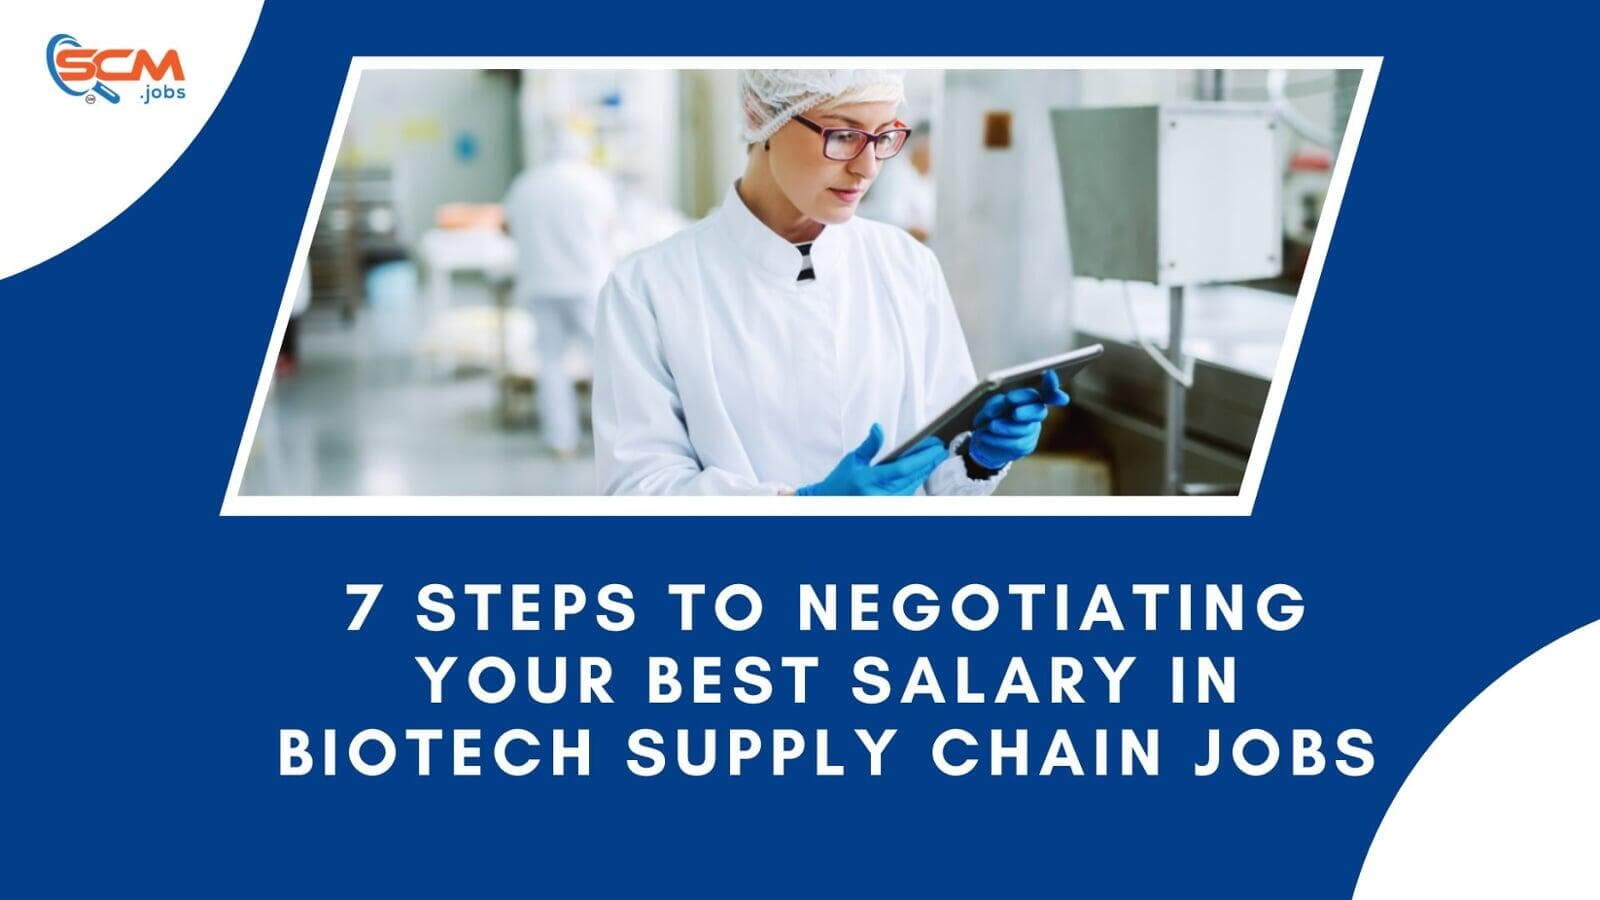 7 Steps To Negotiating Your Best Salary In Biotech Supply Chain Jobs